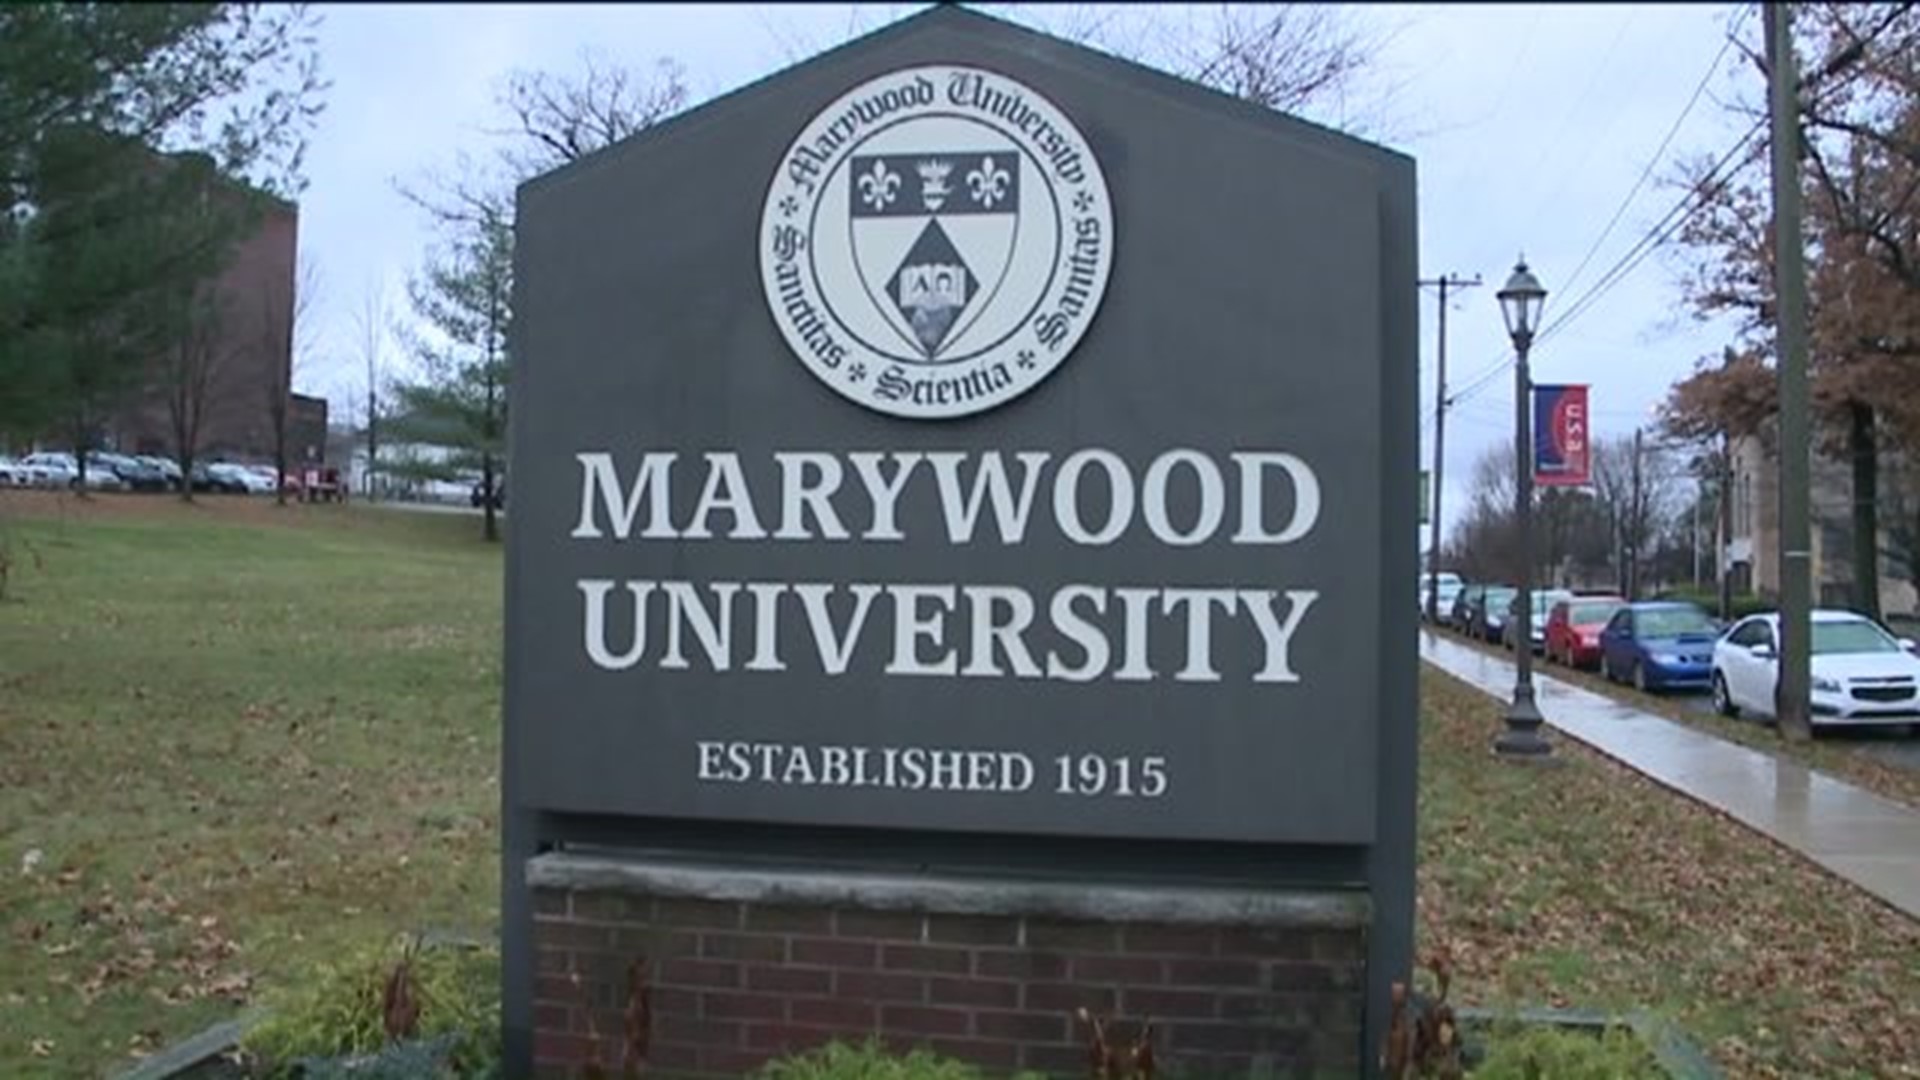 Some Positions, Majors to be Eliminated at Marywood University